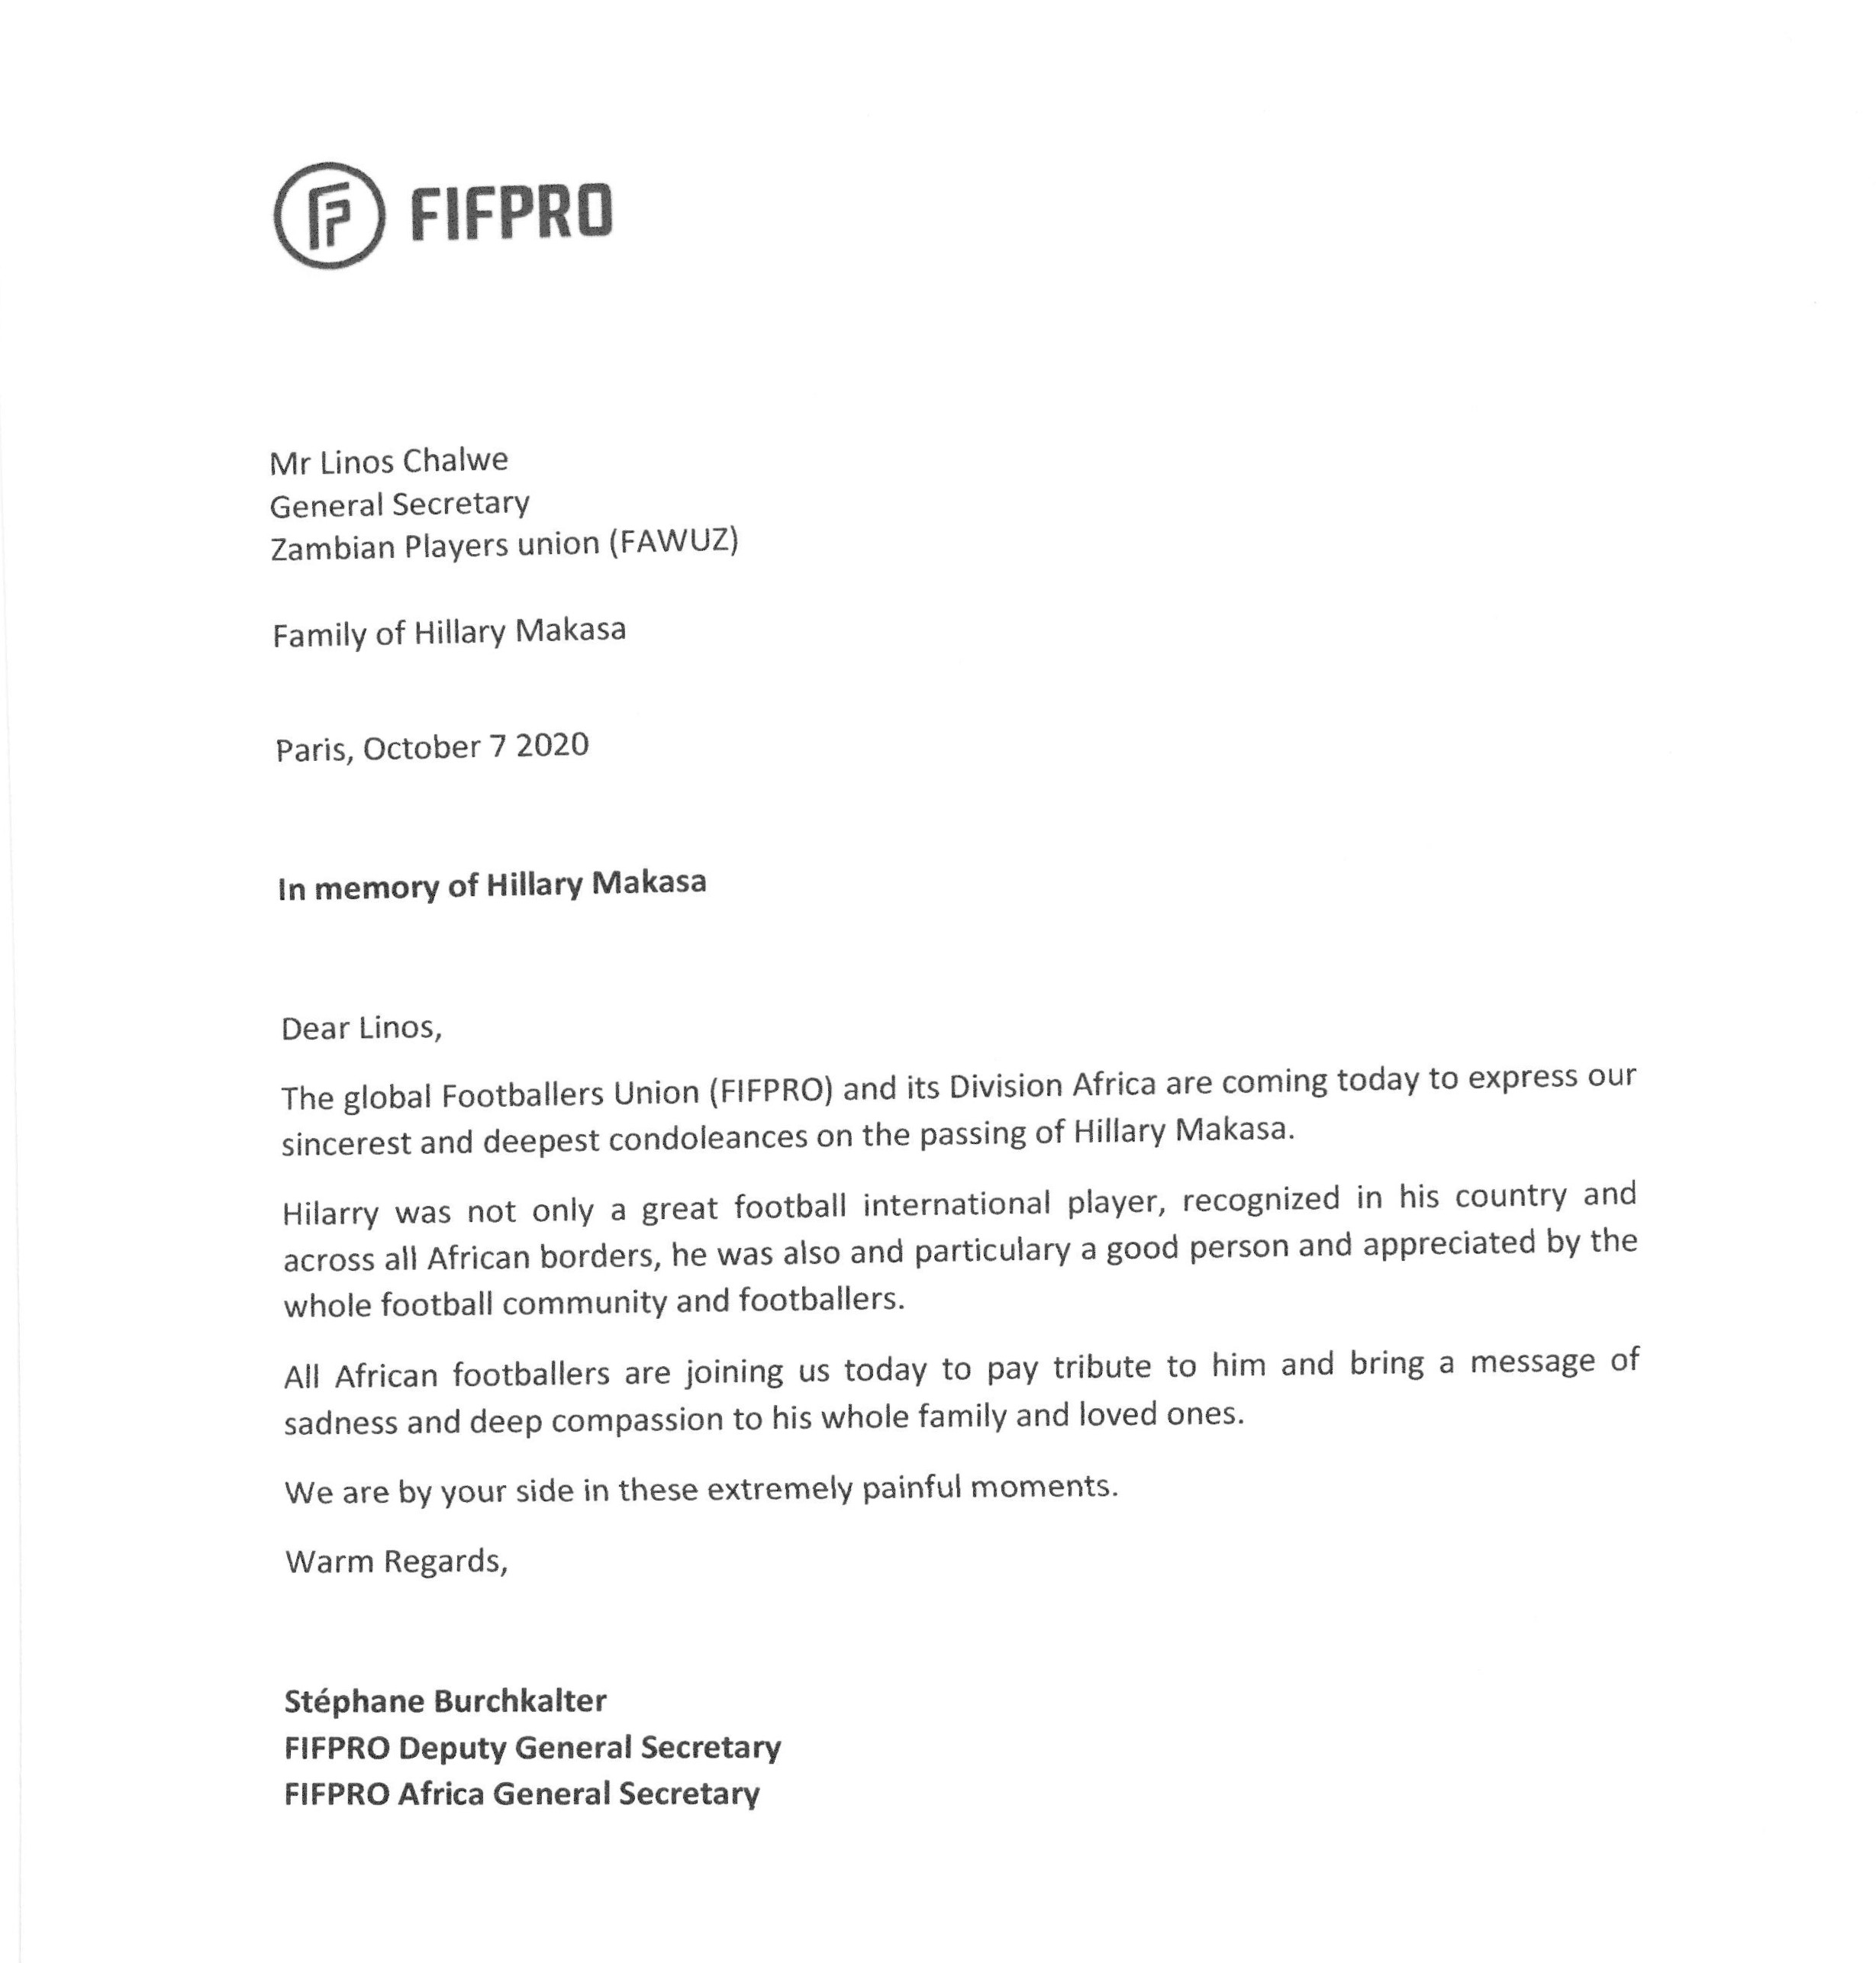 FIFPRO MESSAGE